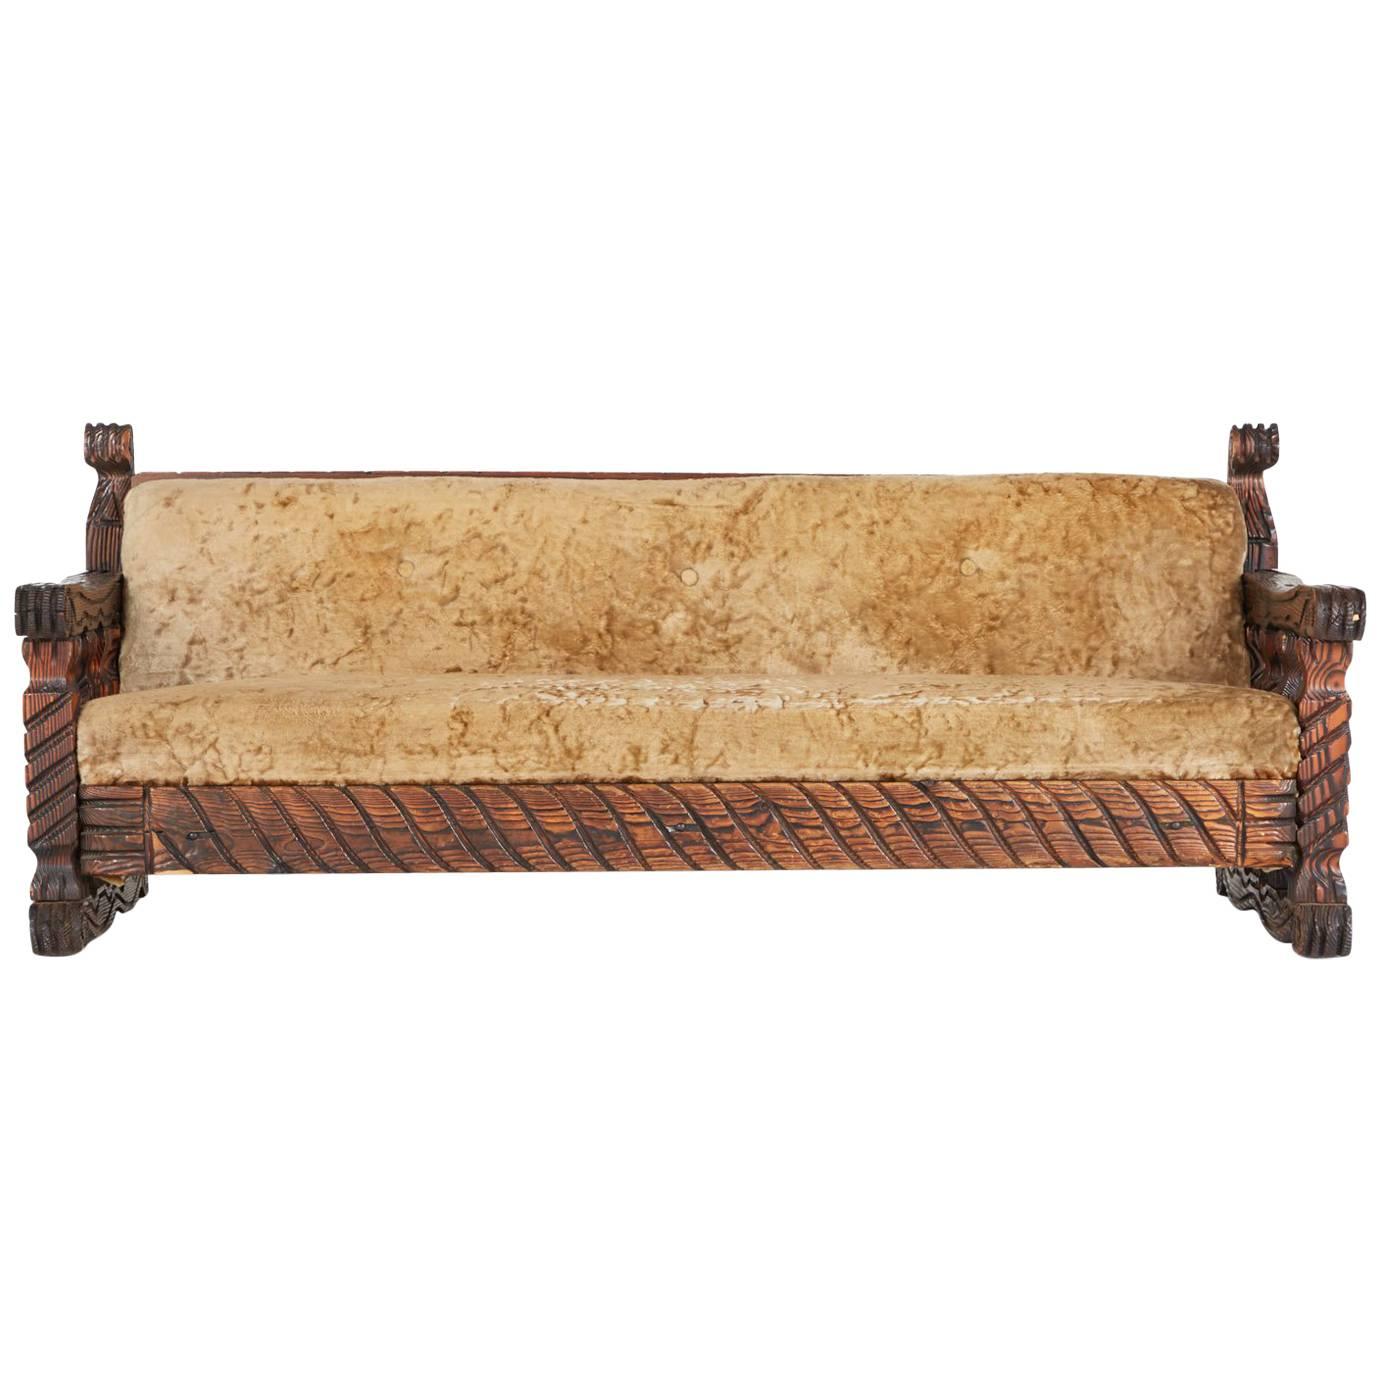 This ornately crafted red walnut tufted sofa with carved exotic details is a testament to William Westenhaver's modern primitive creations. Westenhaver joined forces with Western International Trading Company (Witco) in 1957 to bring his vision of